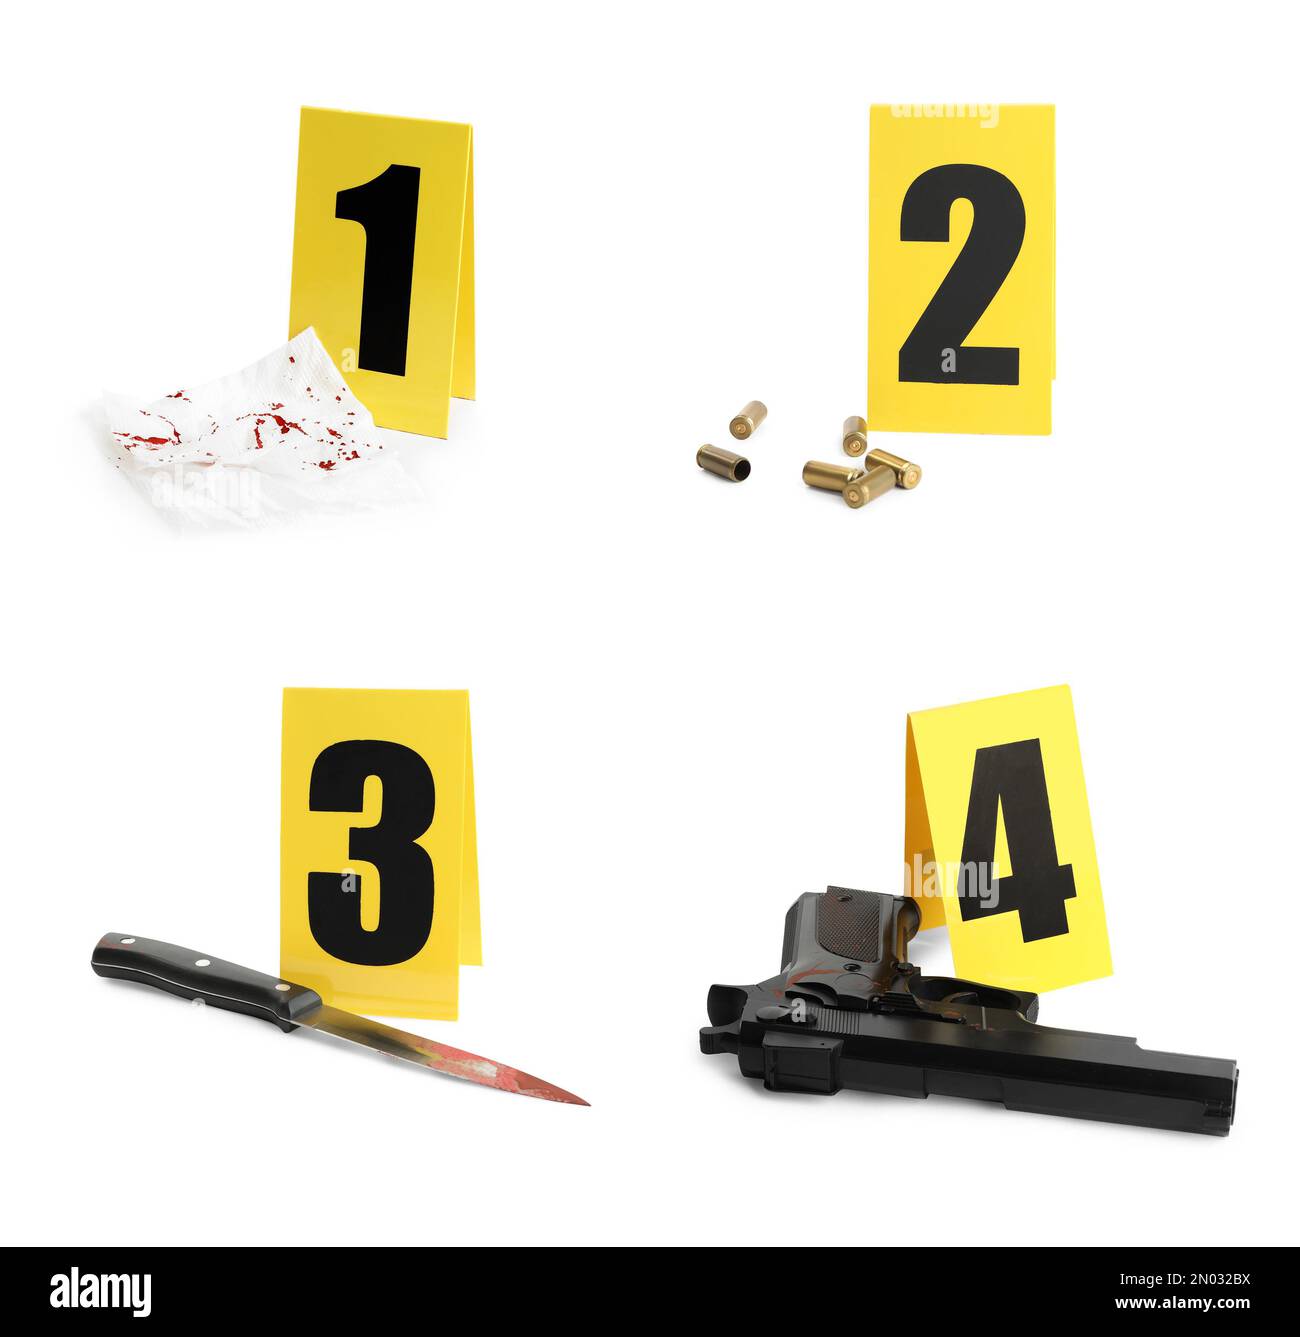 Crime scene investigation. Set of evidence identification markers and clues on white background Stock Photo